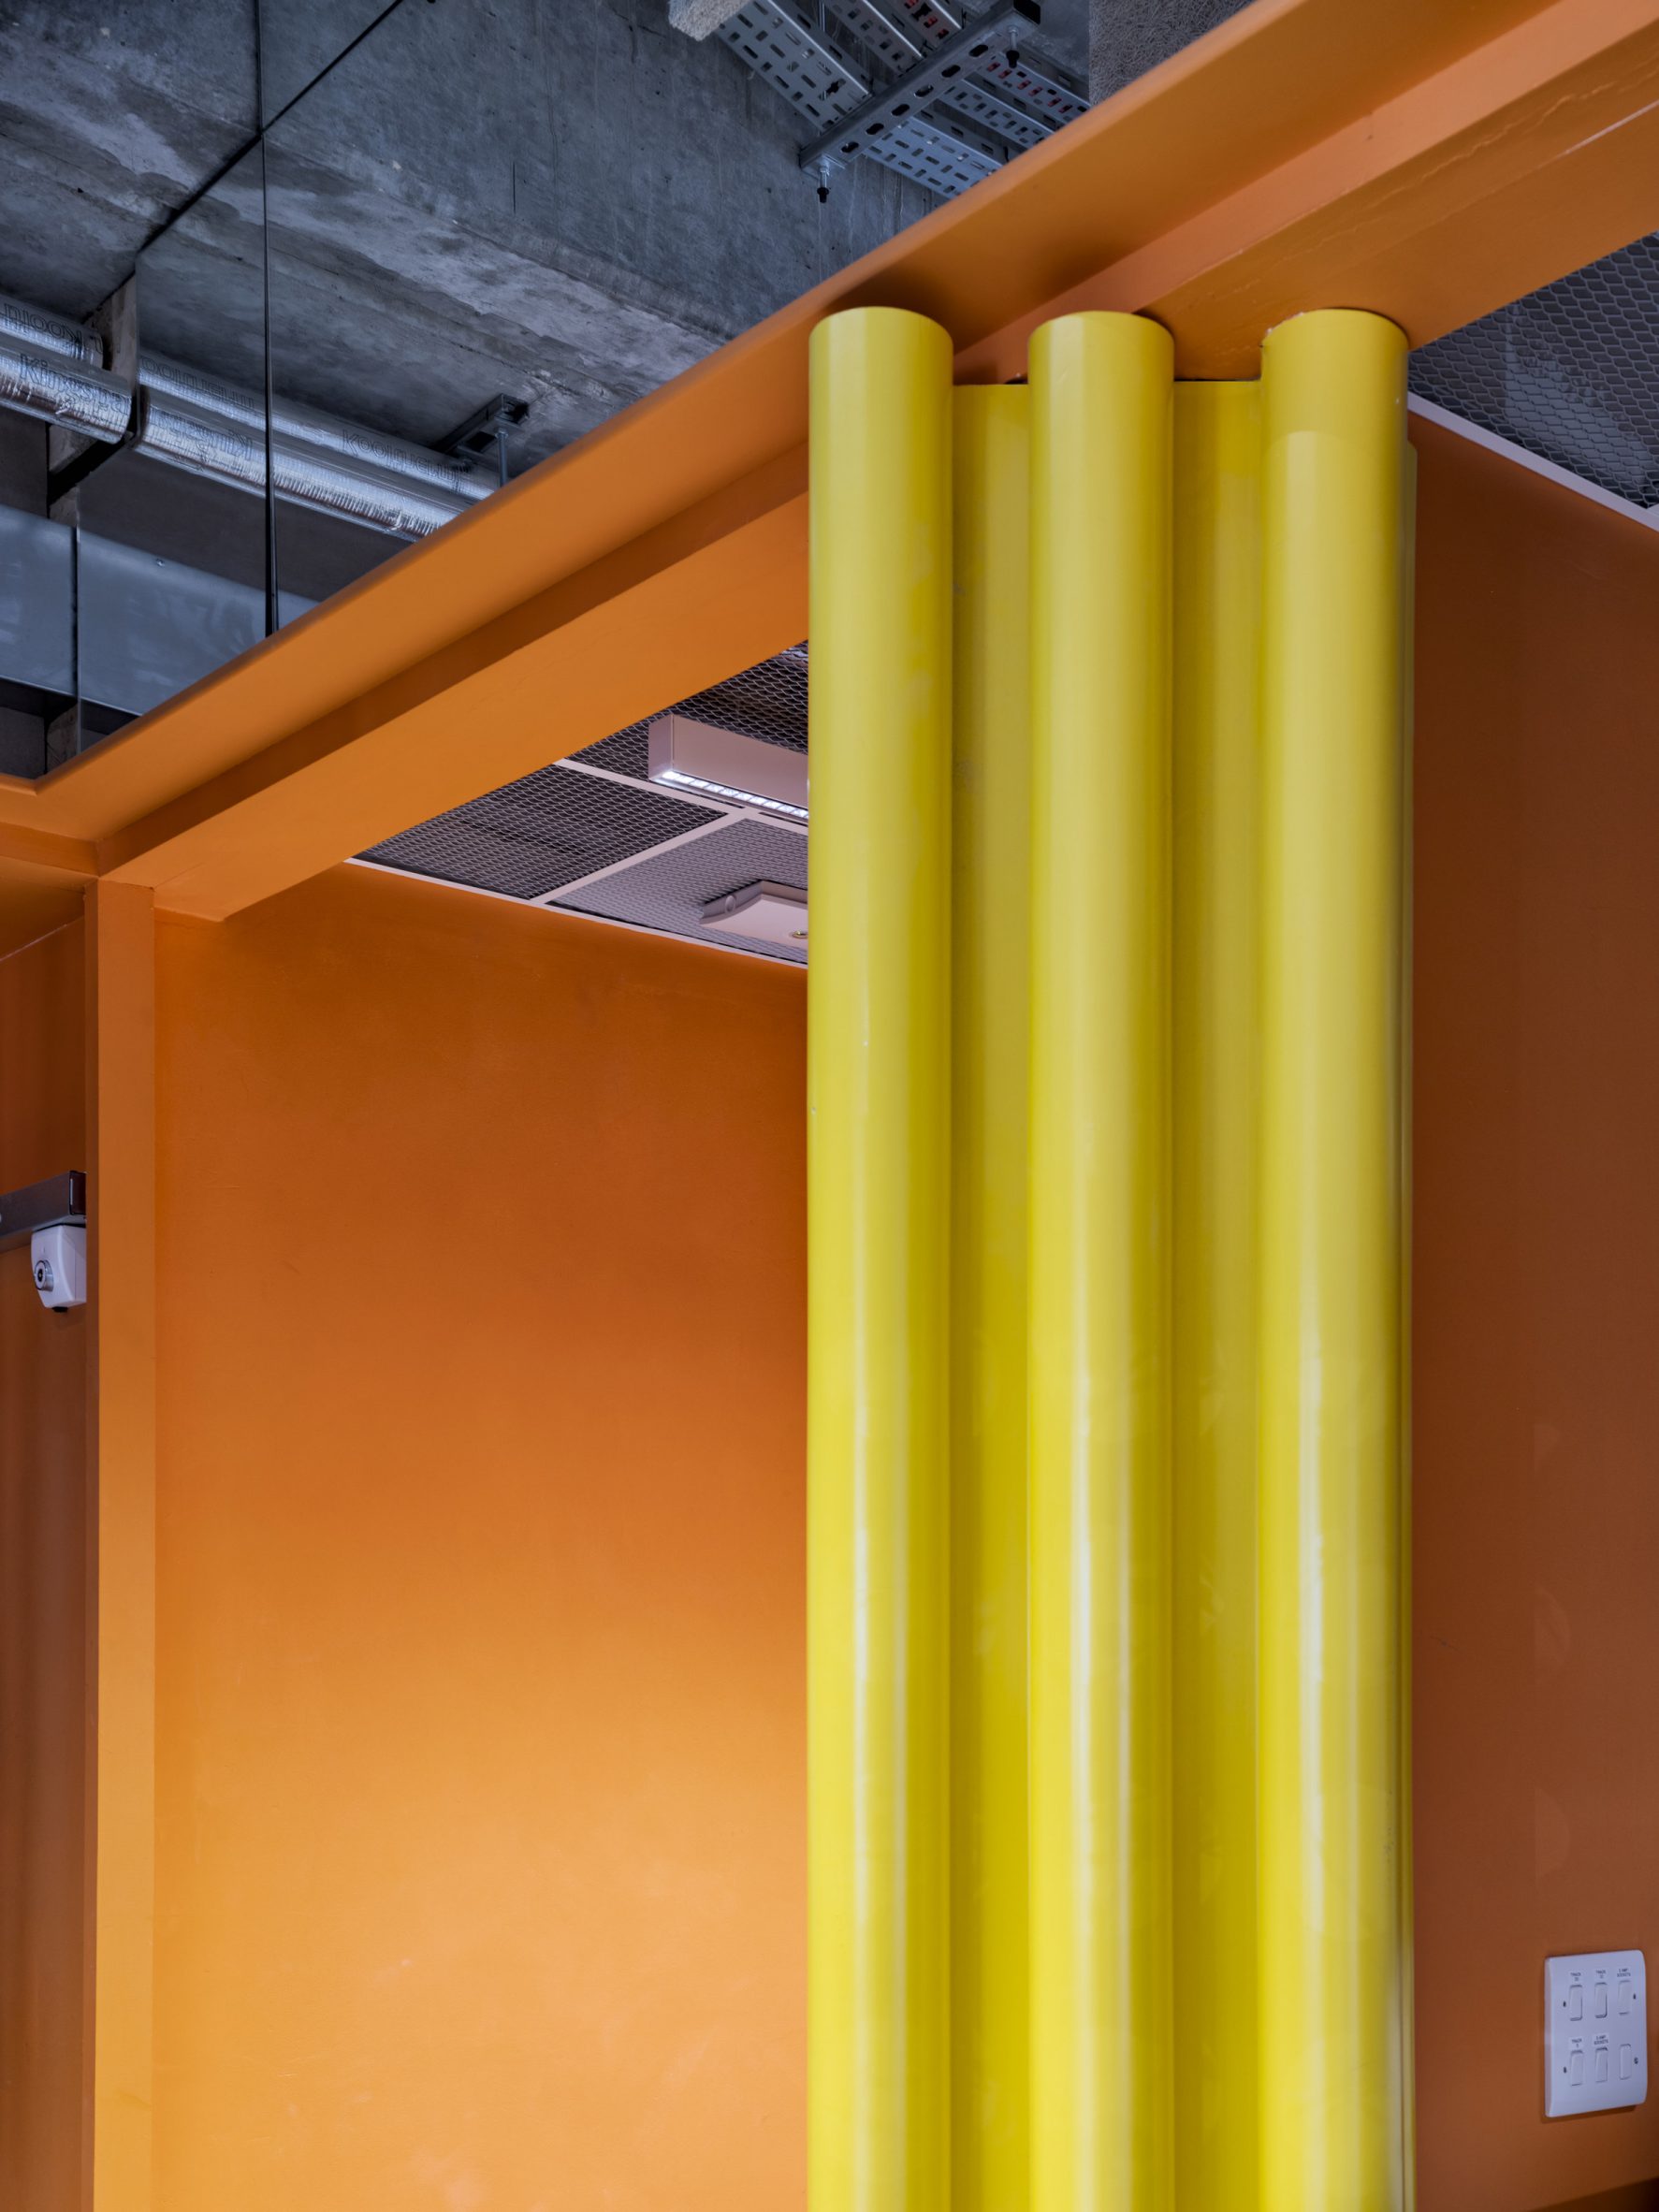 Close-up of pivoting wall section in orange and yellow